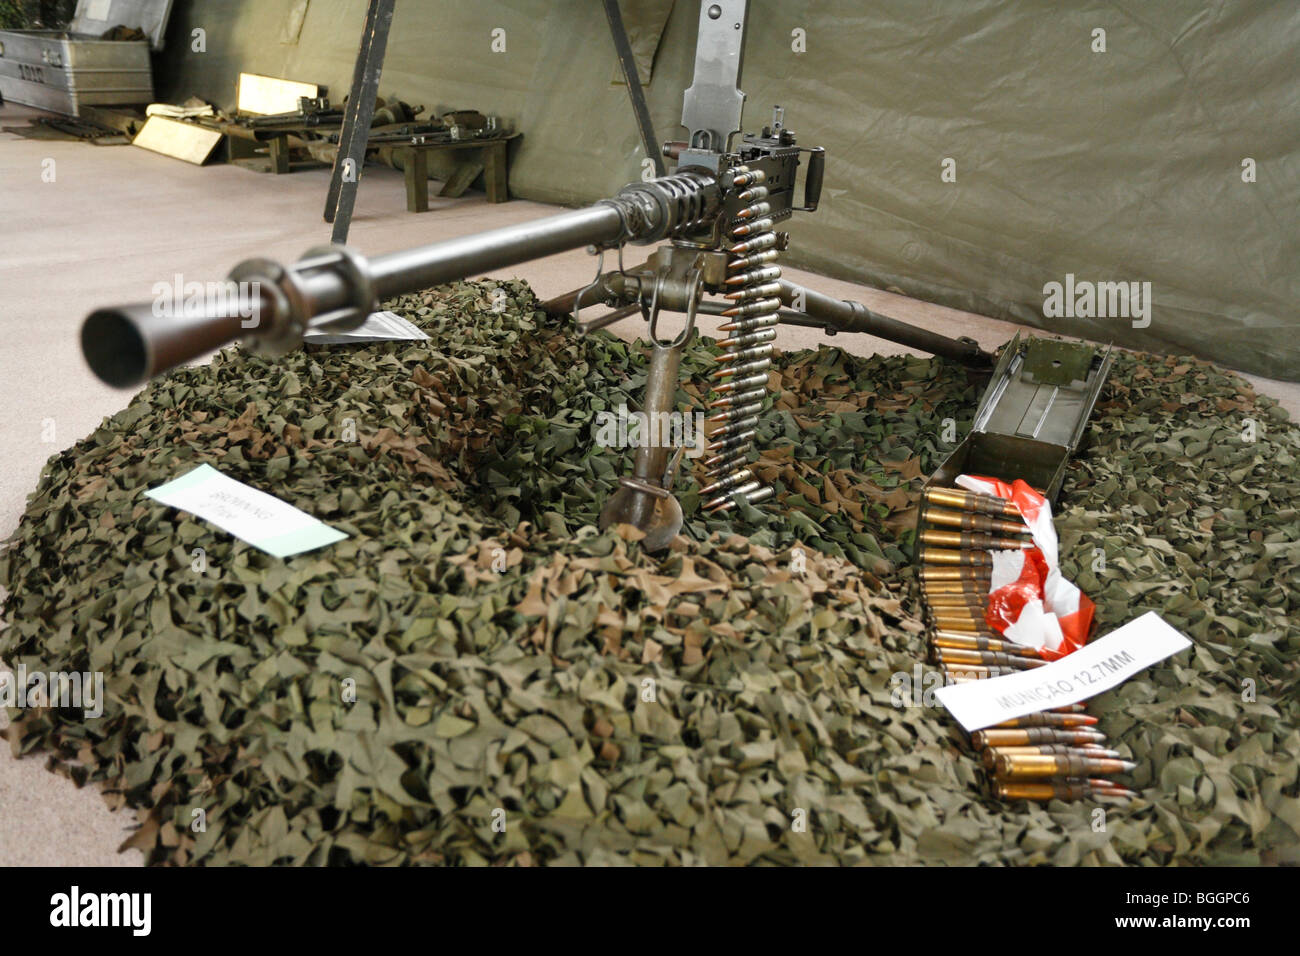 Portuguese Army Browning M2HB heavy machine gun, mounted on a tripod, and some ammunitions. Stock Photo